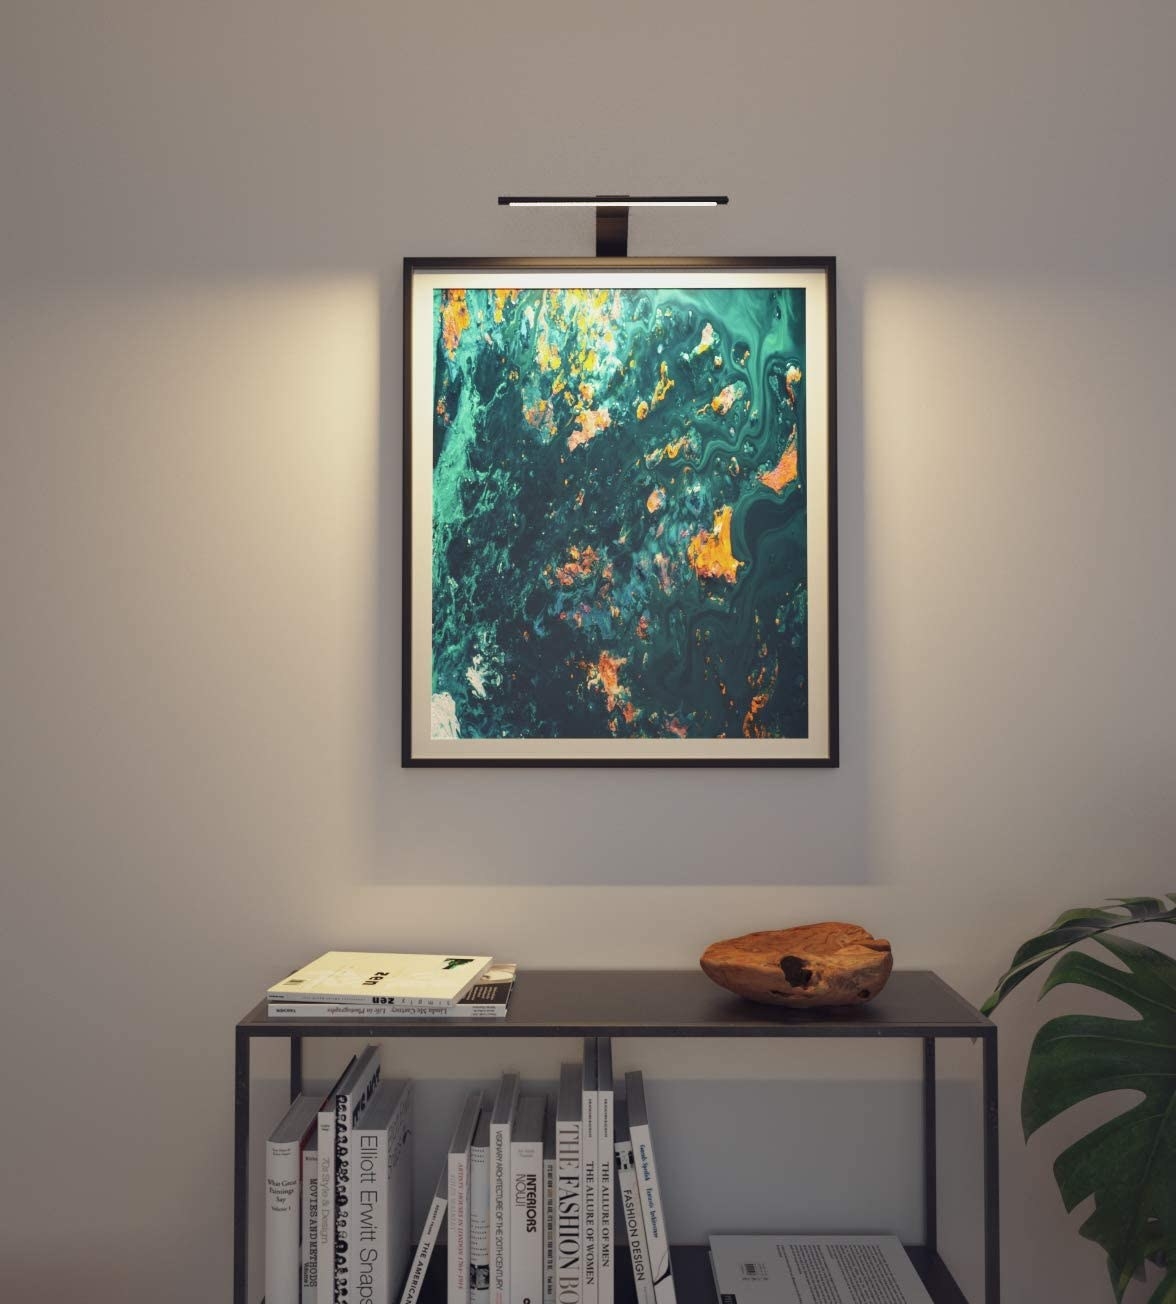 the painting lamp over a painting